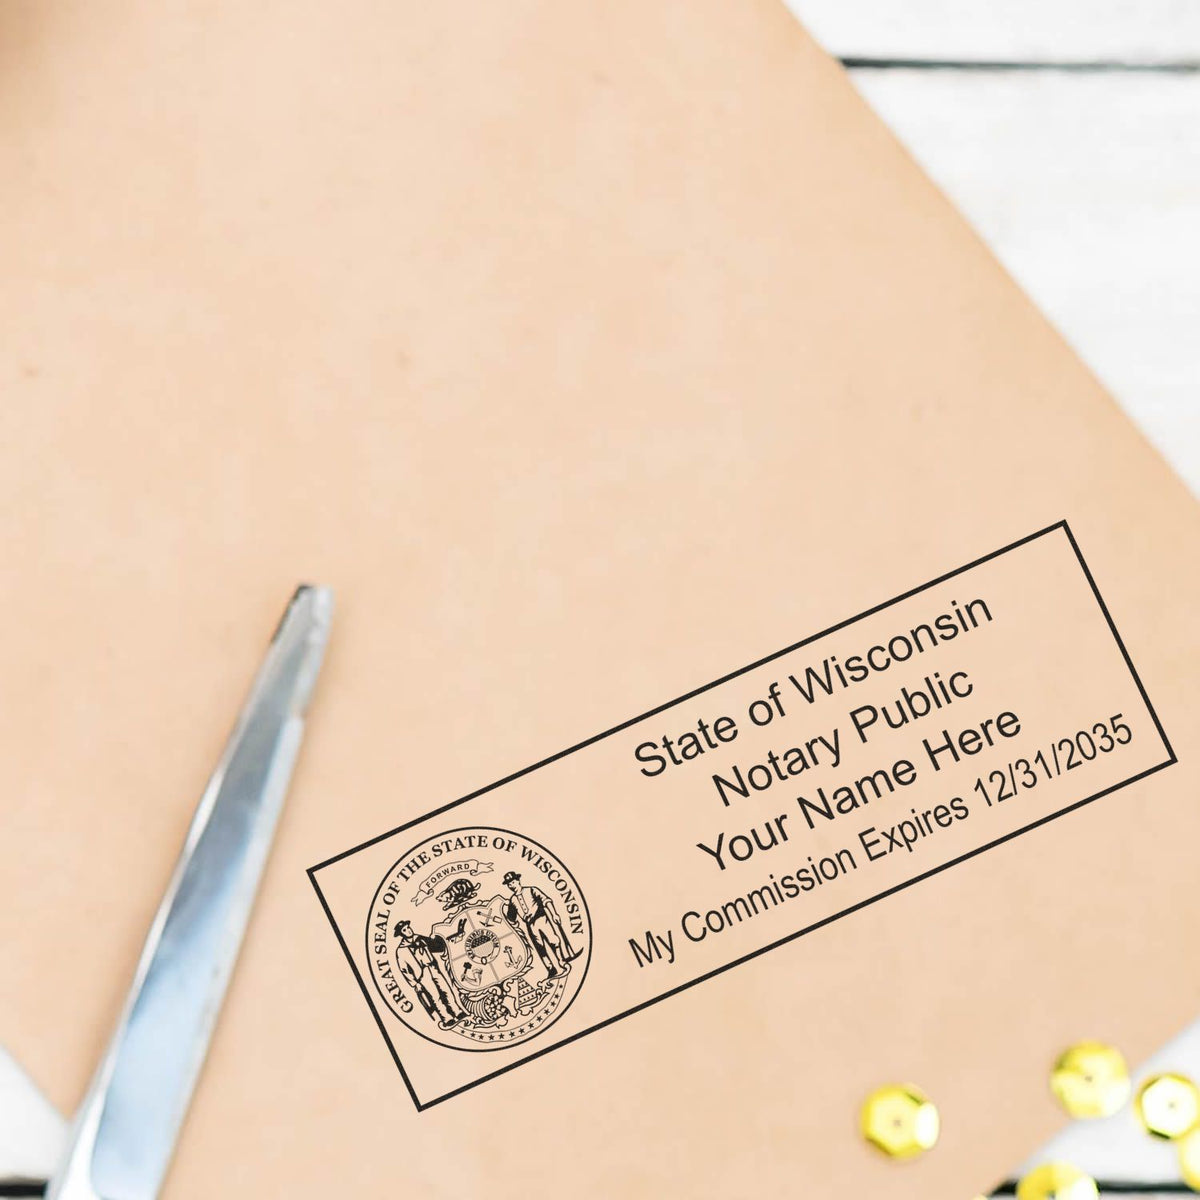 The Slim Pre-Inked State Seal Notary Stamp for Wisconsin stamp impression comes to life with a crisp, detailed photo on paper - showcasing true professional quality.